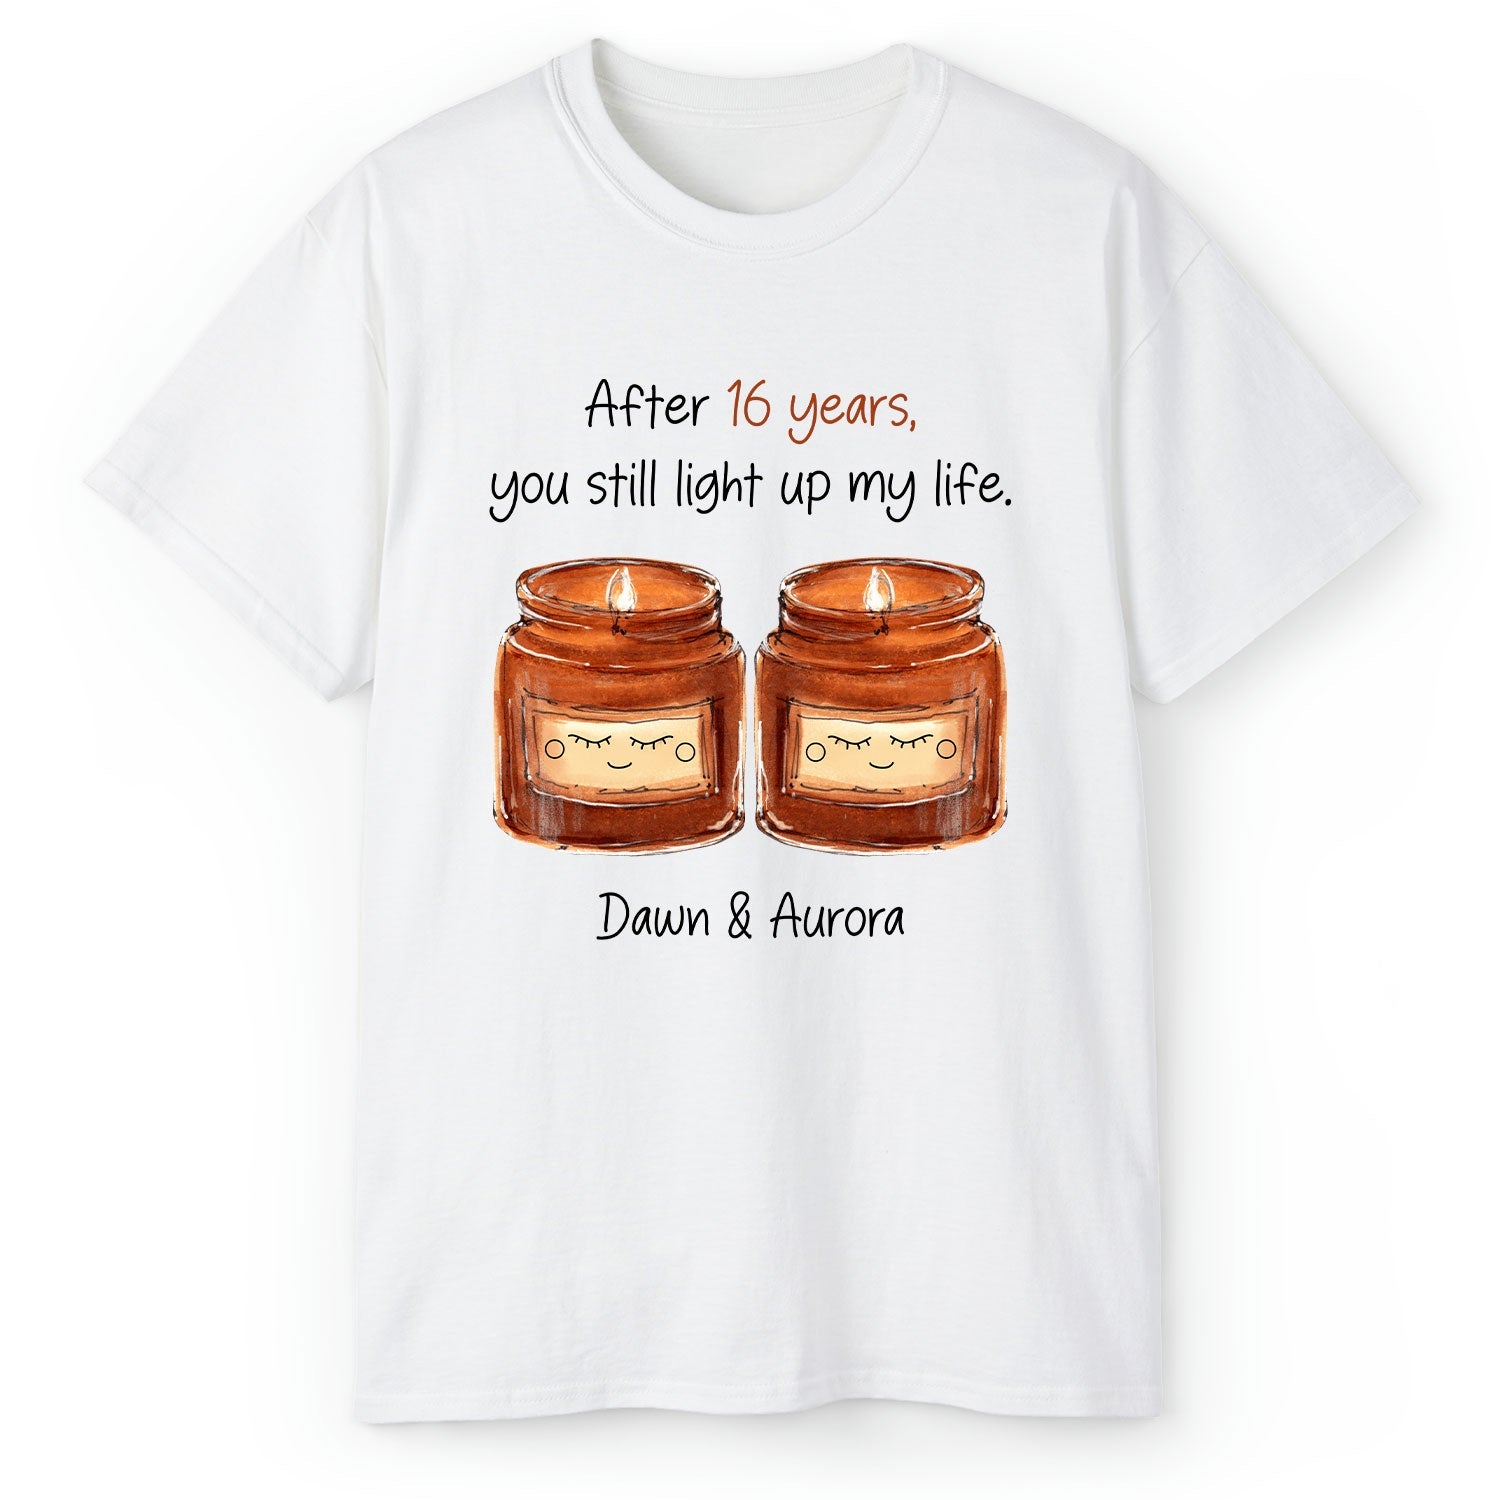 You Still Light Up My Life - Personalized 16 Year Anniversary gift For Husband or Wife - Custom Tshirt - MyMindfulGifts